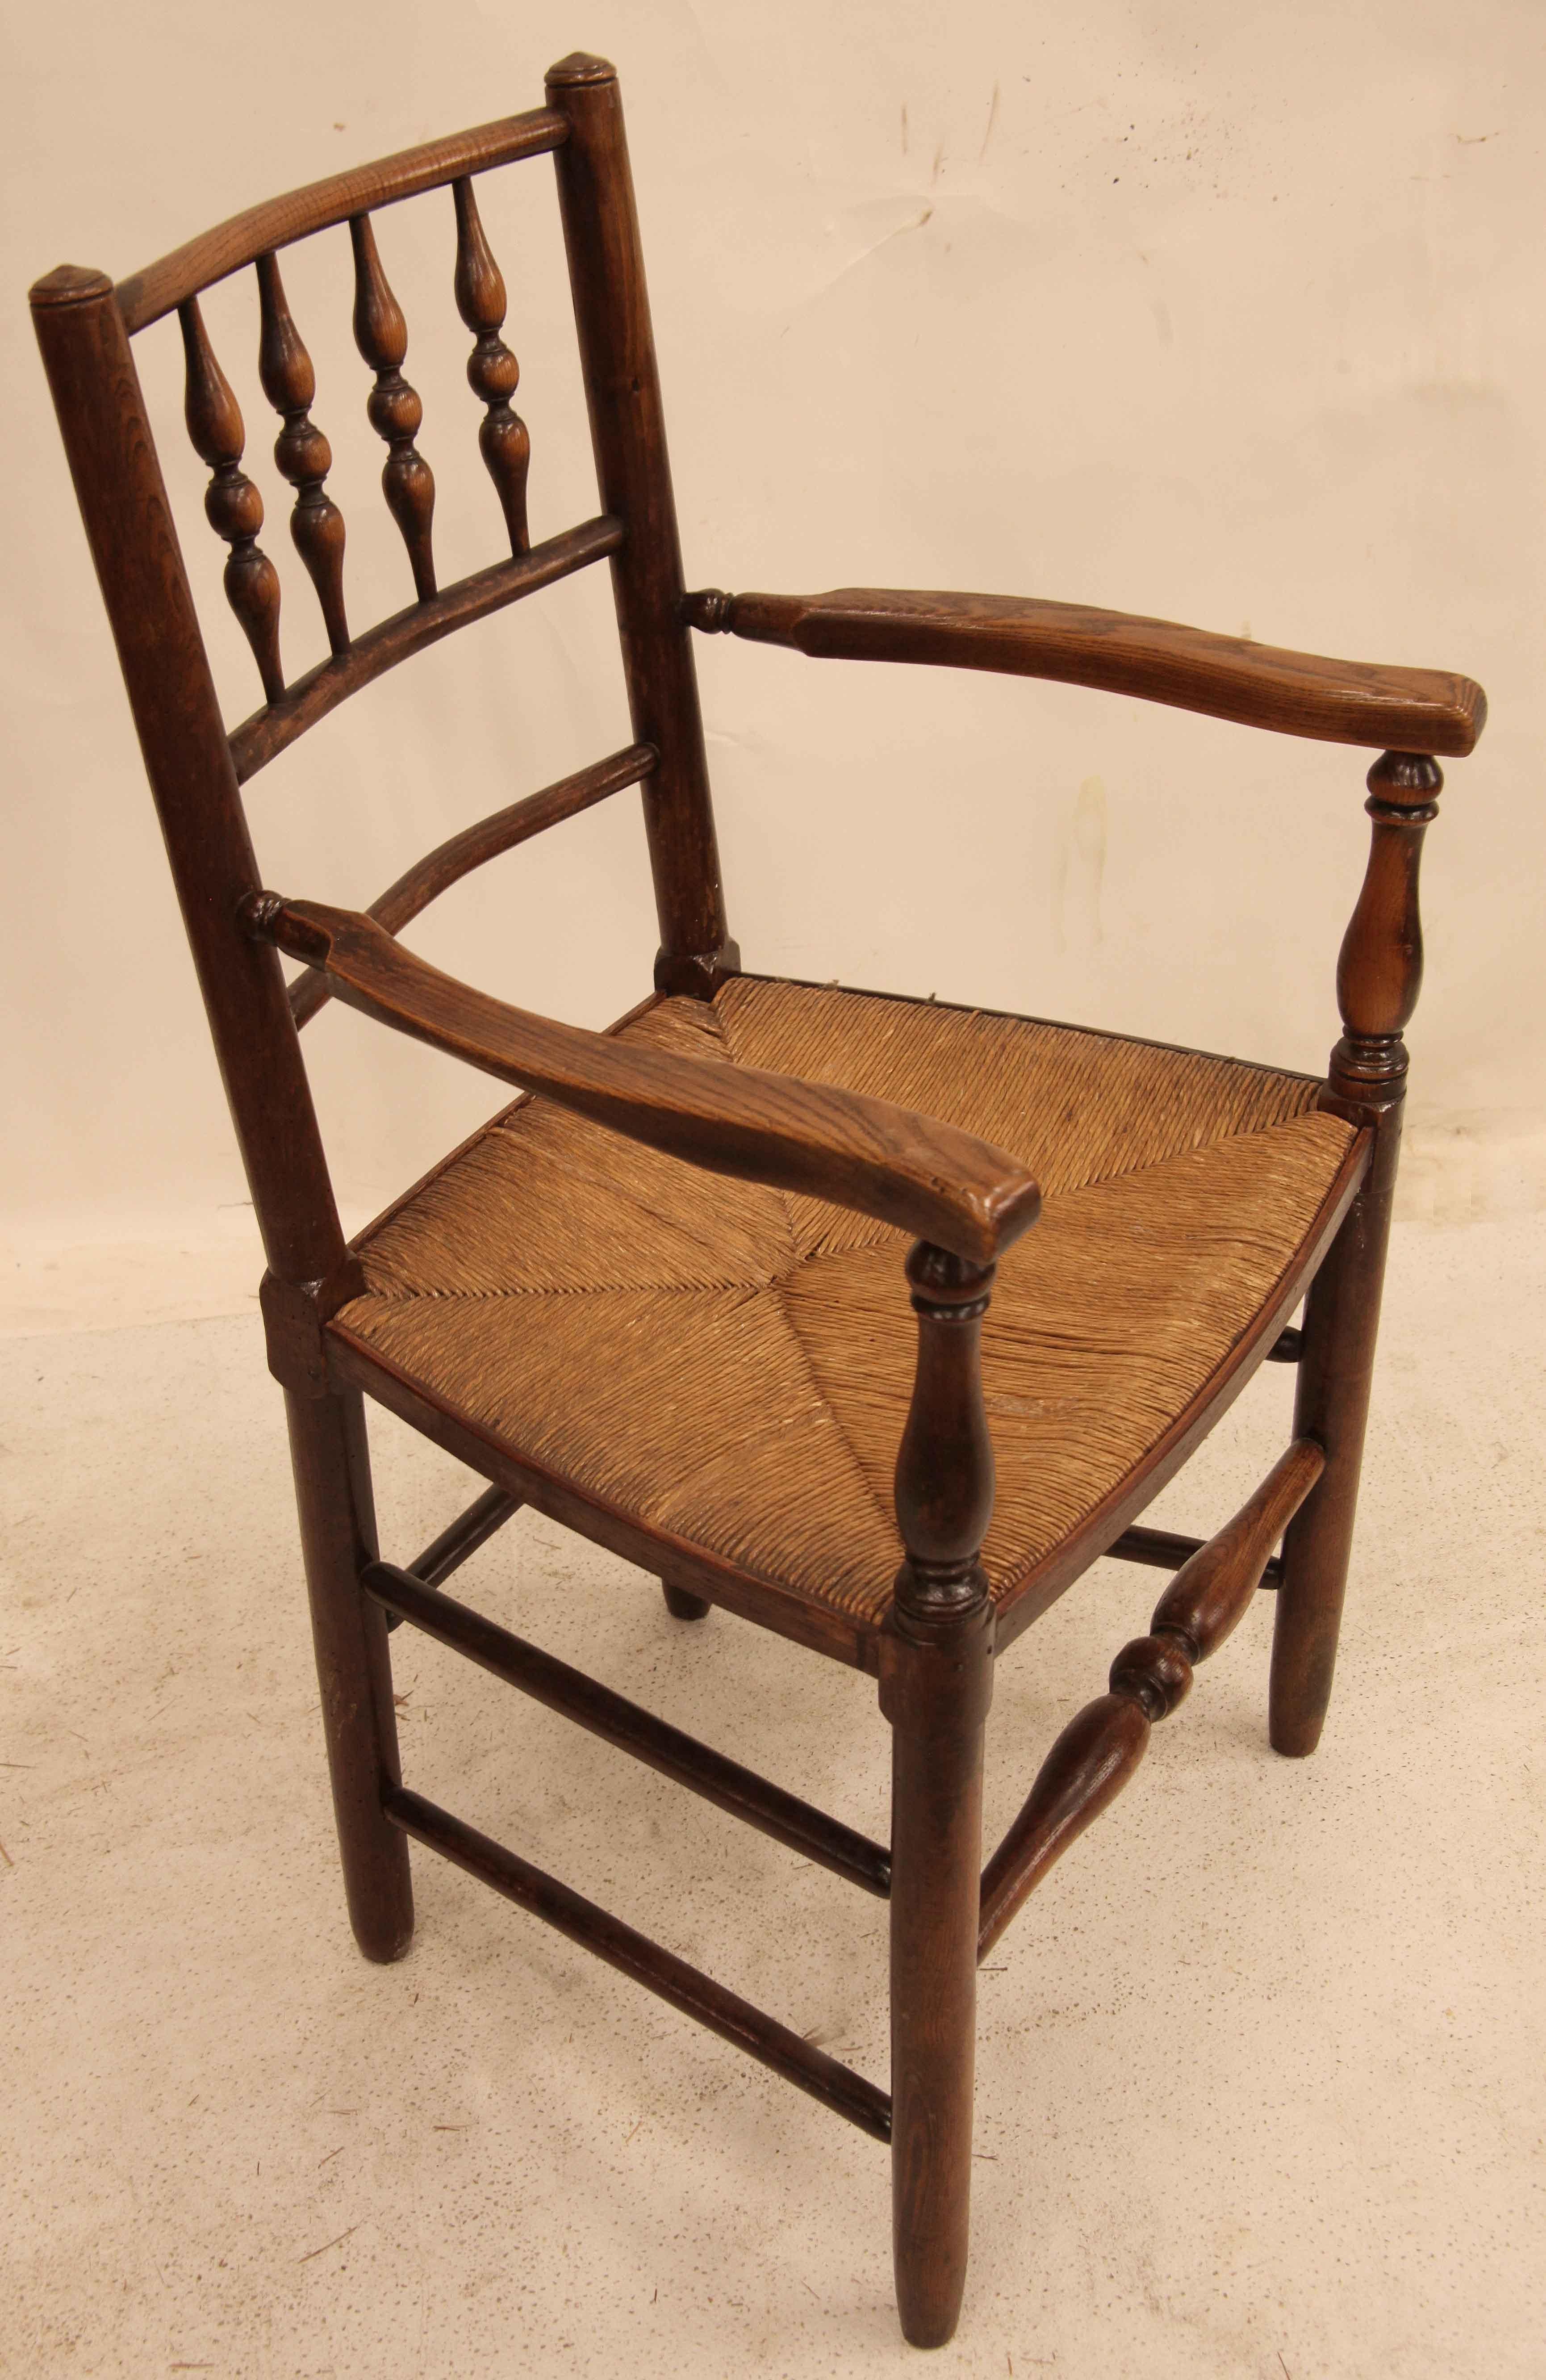 English spindle back chair,  the back is shaped for a very comfortable sitting, original rush seat, the arms and spindles have a beautiful patina that comes from decades of use.  There are single and double stretchers around the perimeter of the